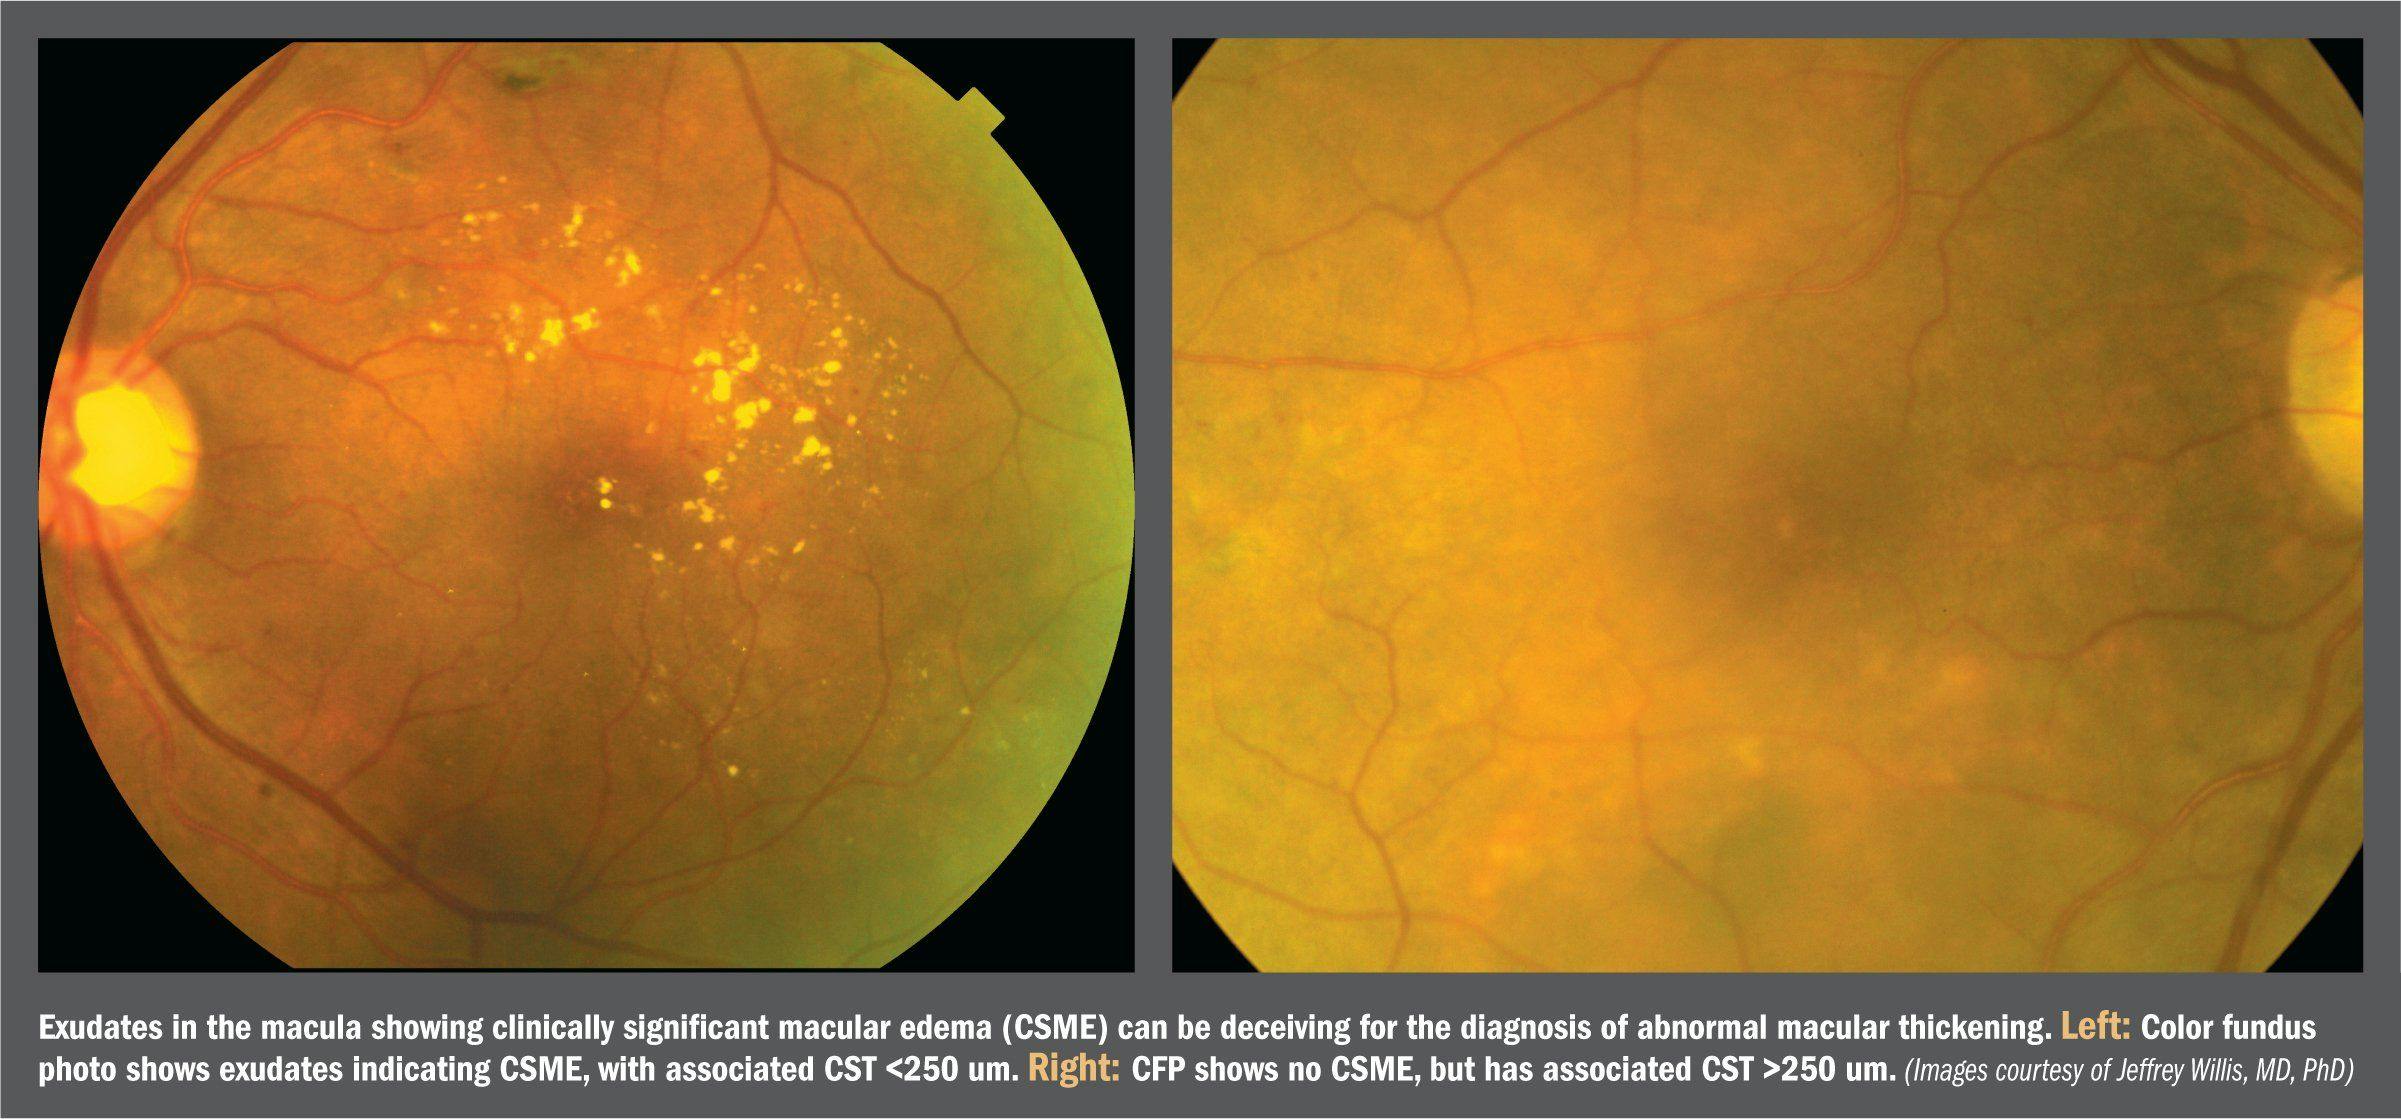 Deep learning predicts OCT measures of diabetic macular thickening